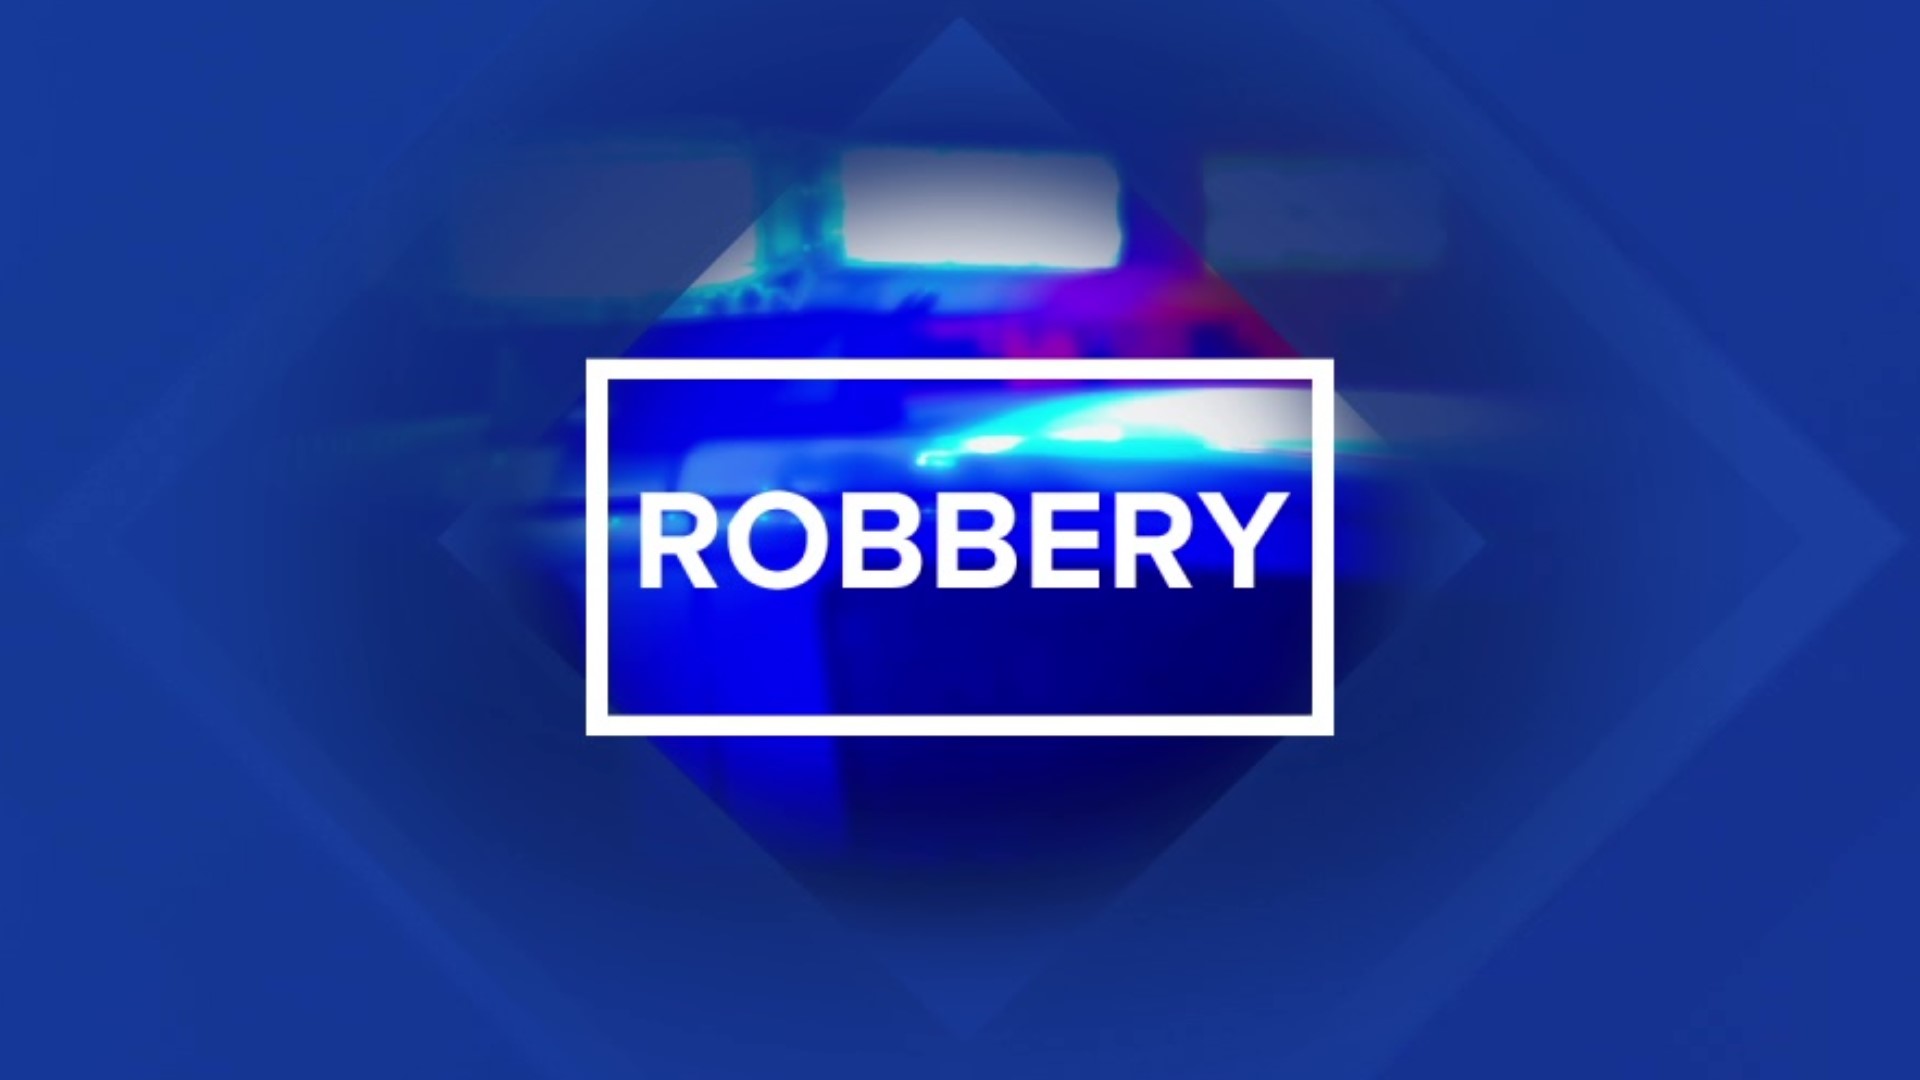 The robbery happened around 10 p.m. Friday night at the Exxon Mobil gas station along Church Street in the borough.